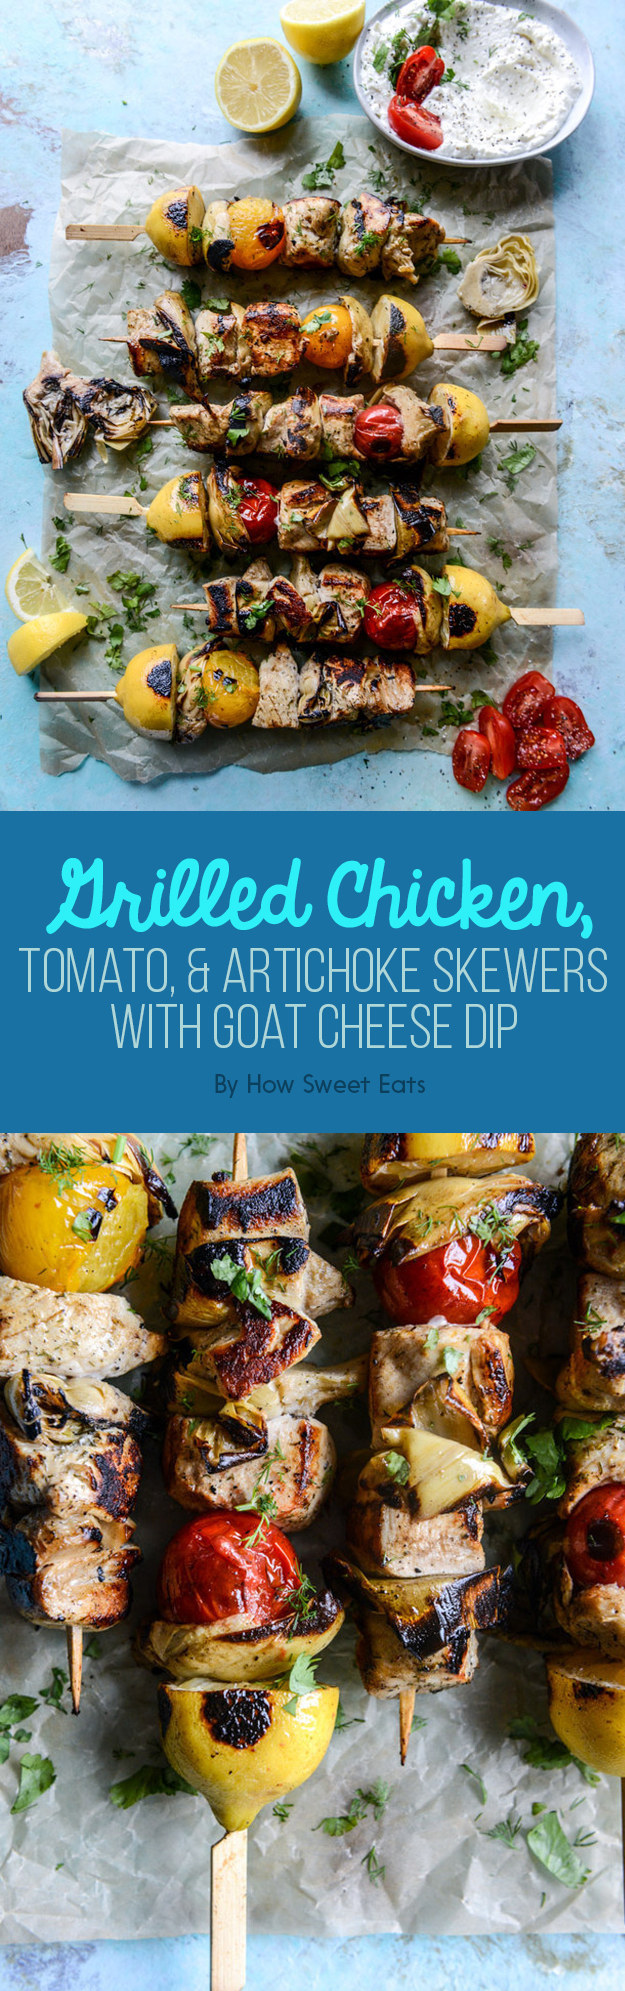 Grilled Chicken, Tomato, and Artichoke Skewers with Goat Cheese Dip